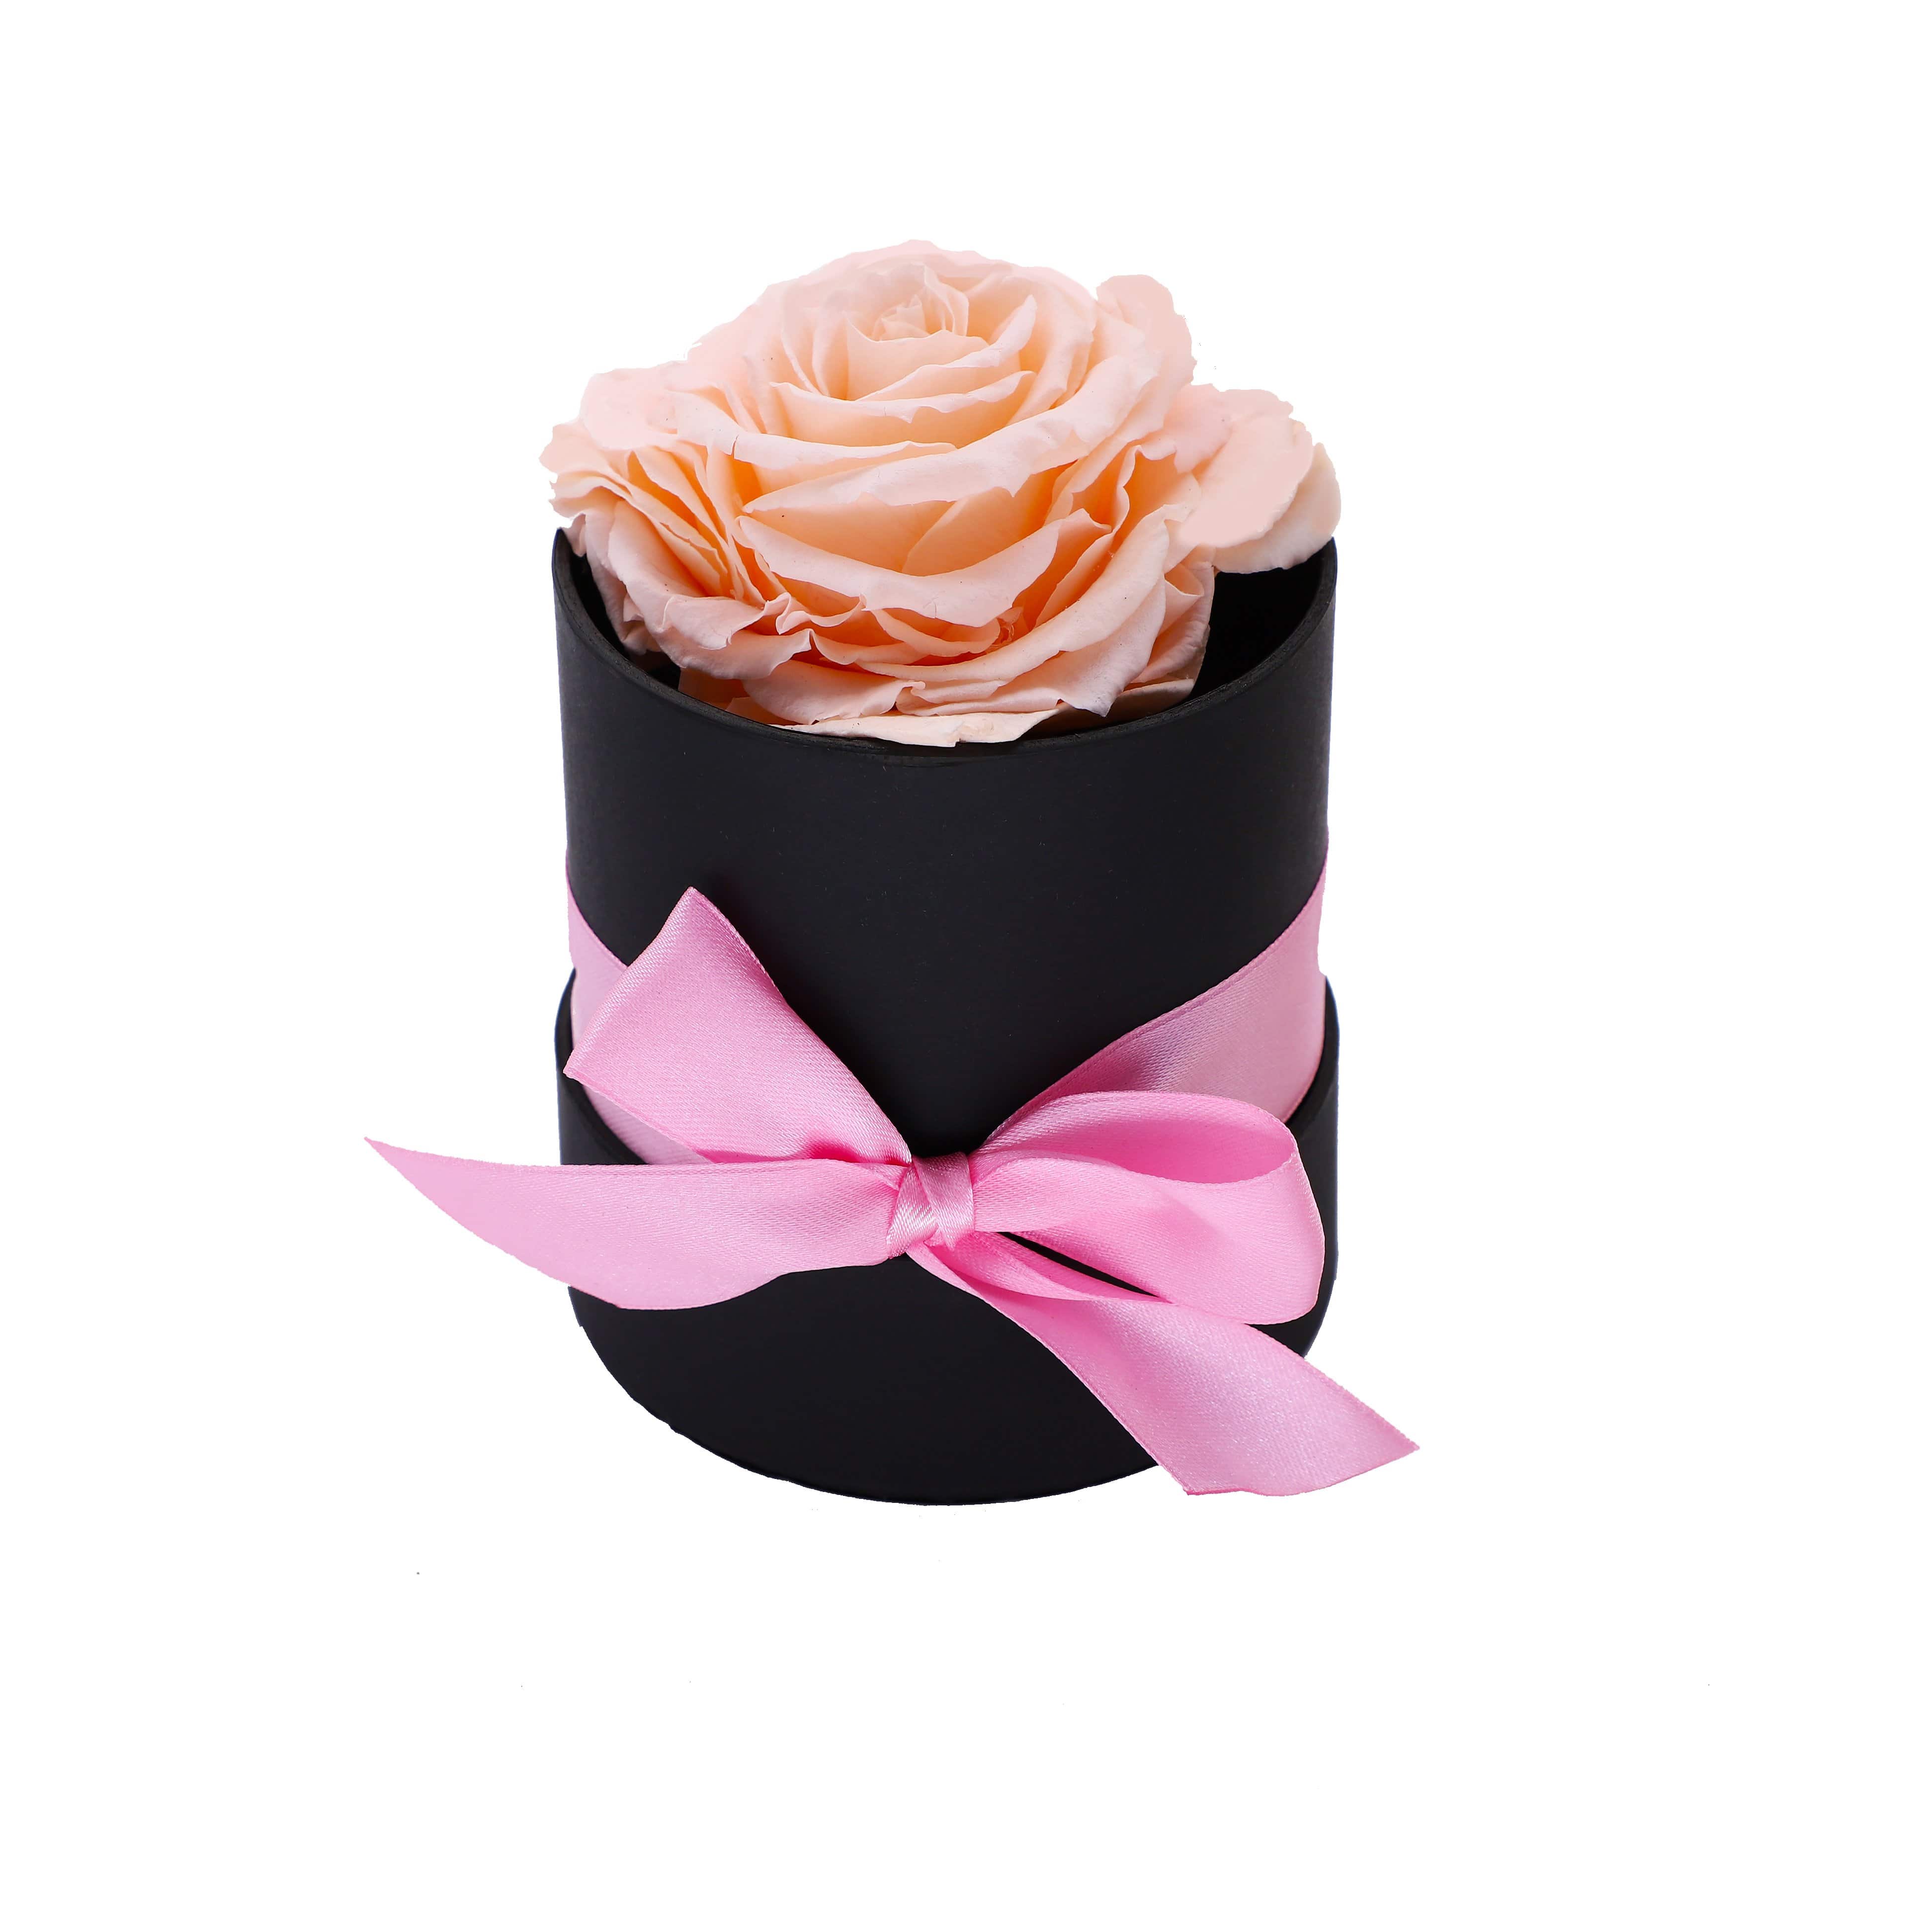 Light Pink Heart Shape Forever Rose in A Box - Black Gift Box - Le Jardin Infini Roses in a Box